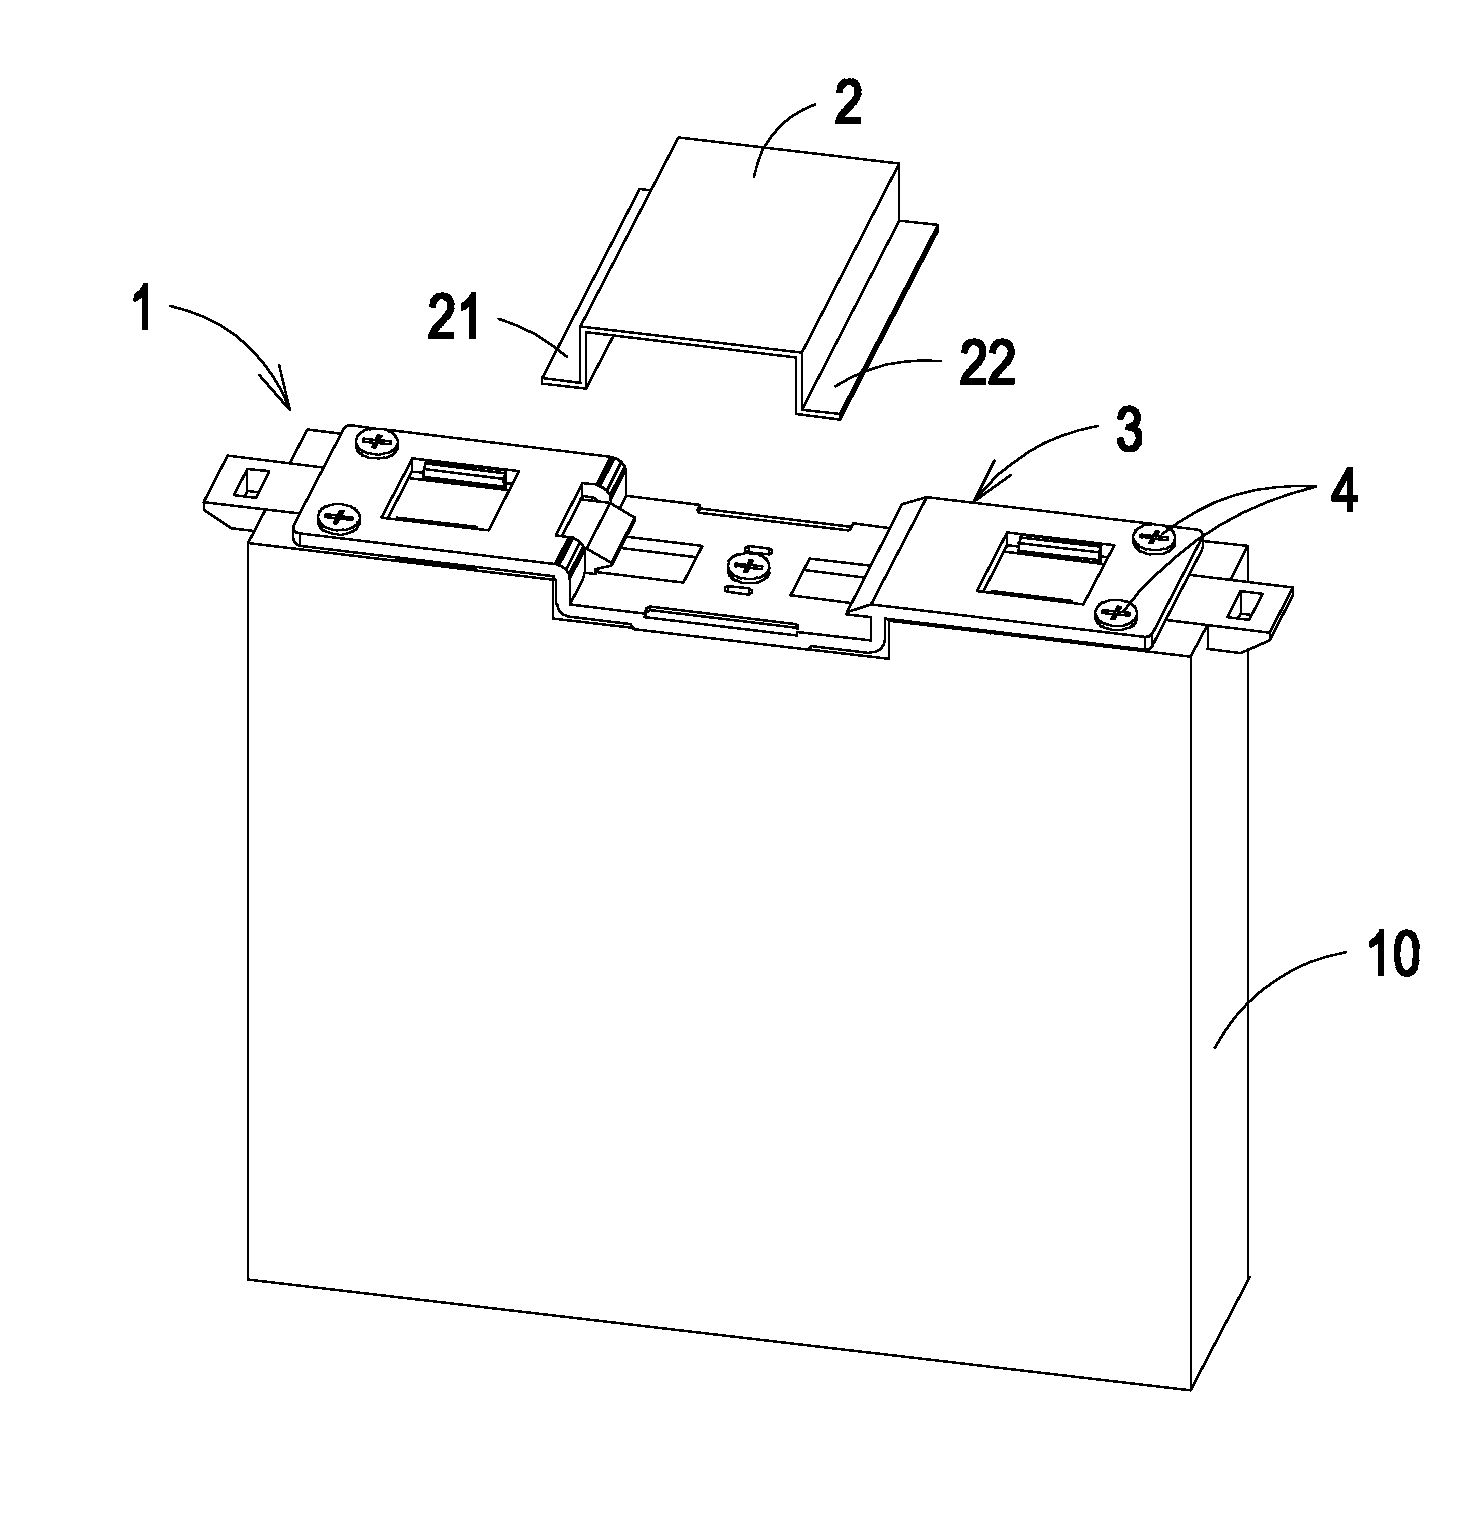 Mechanism of fastening detachable electronic device to DIN rail